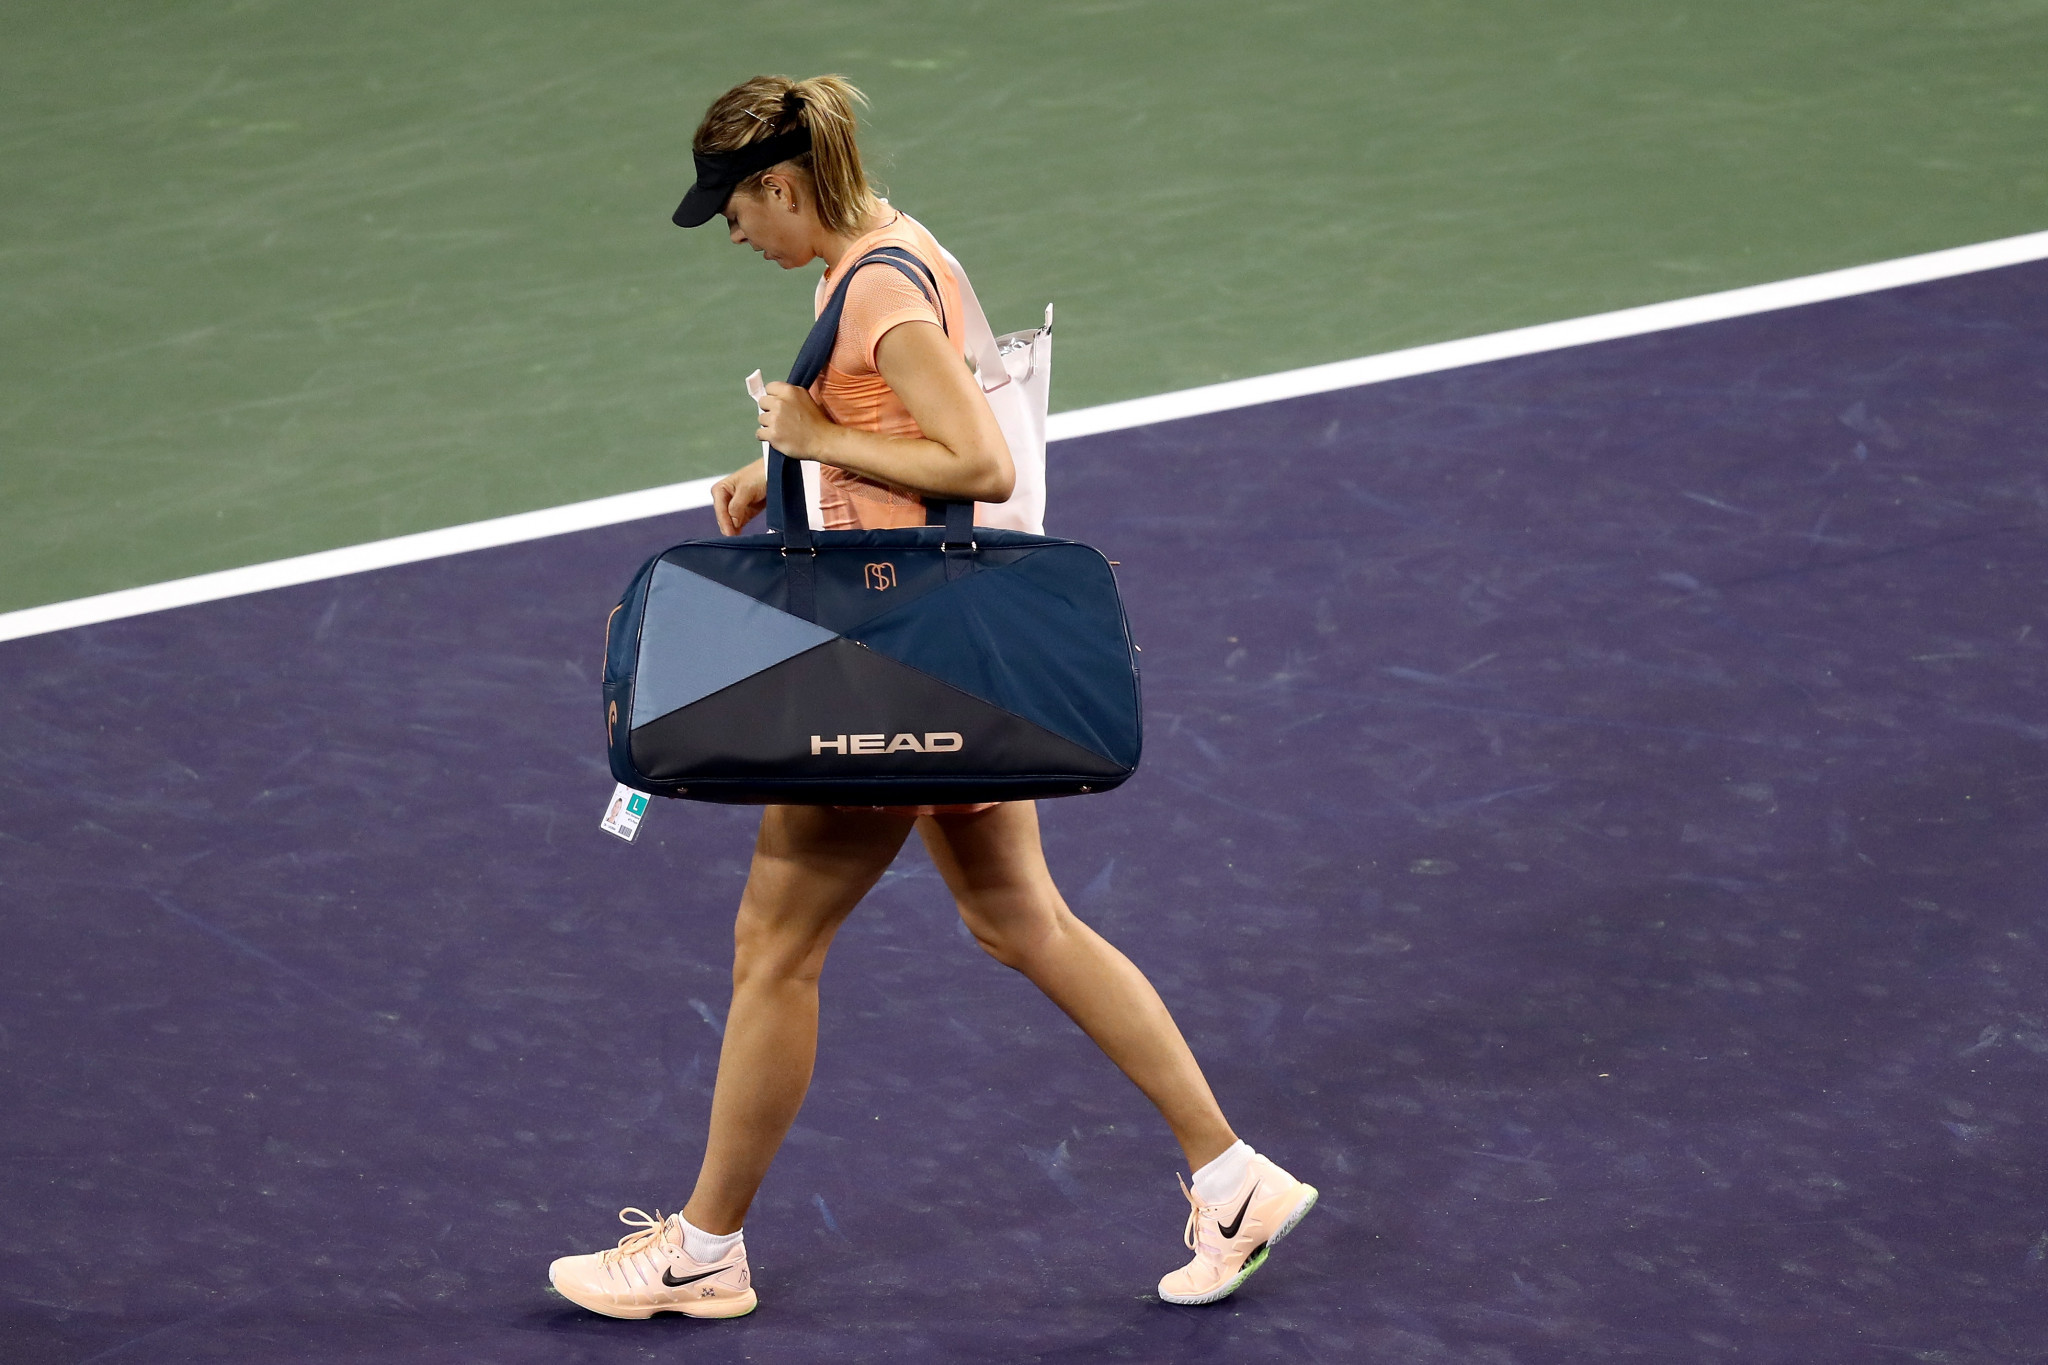 Sharapova suffers second straight opening round loss at Indian Wells Masters